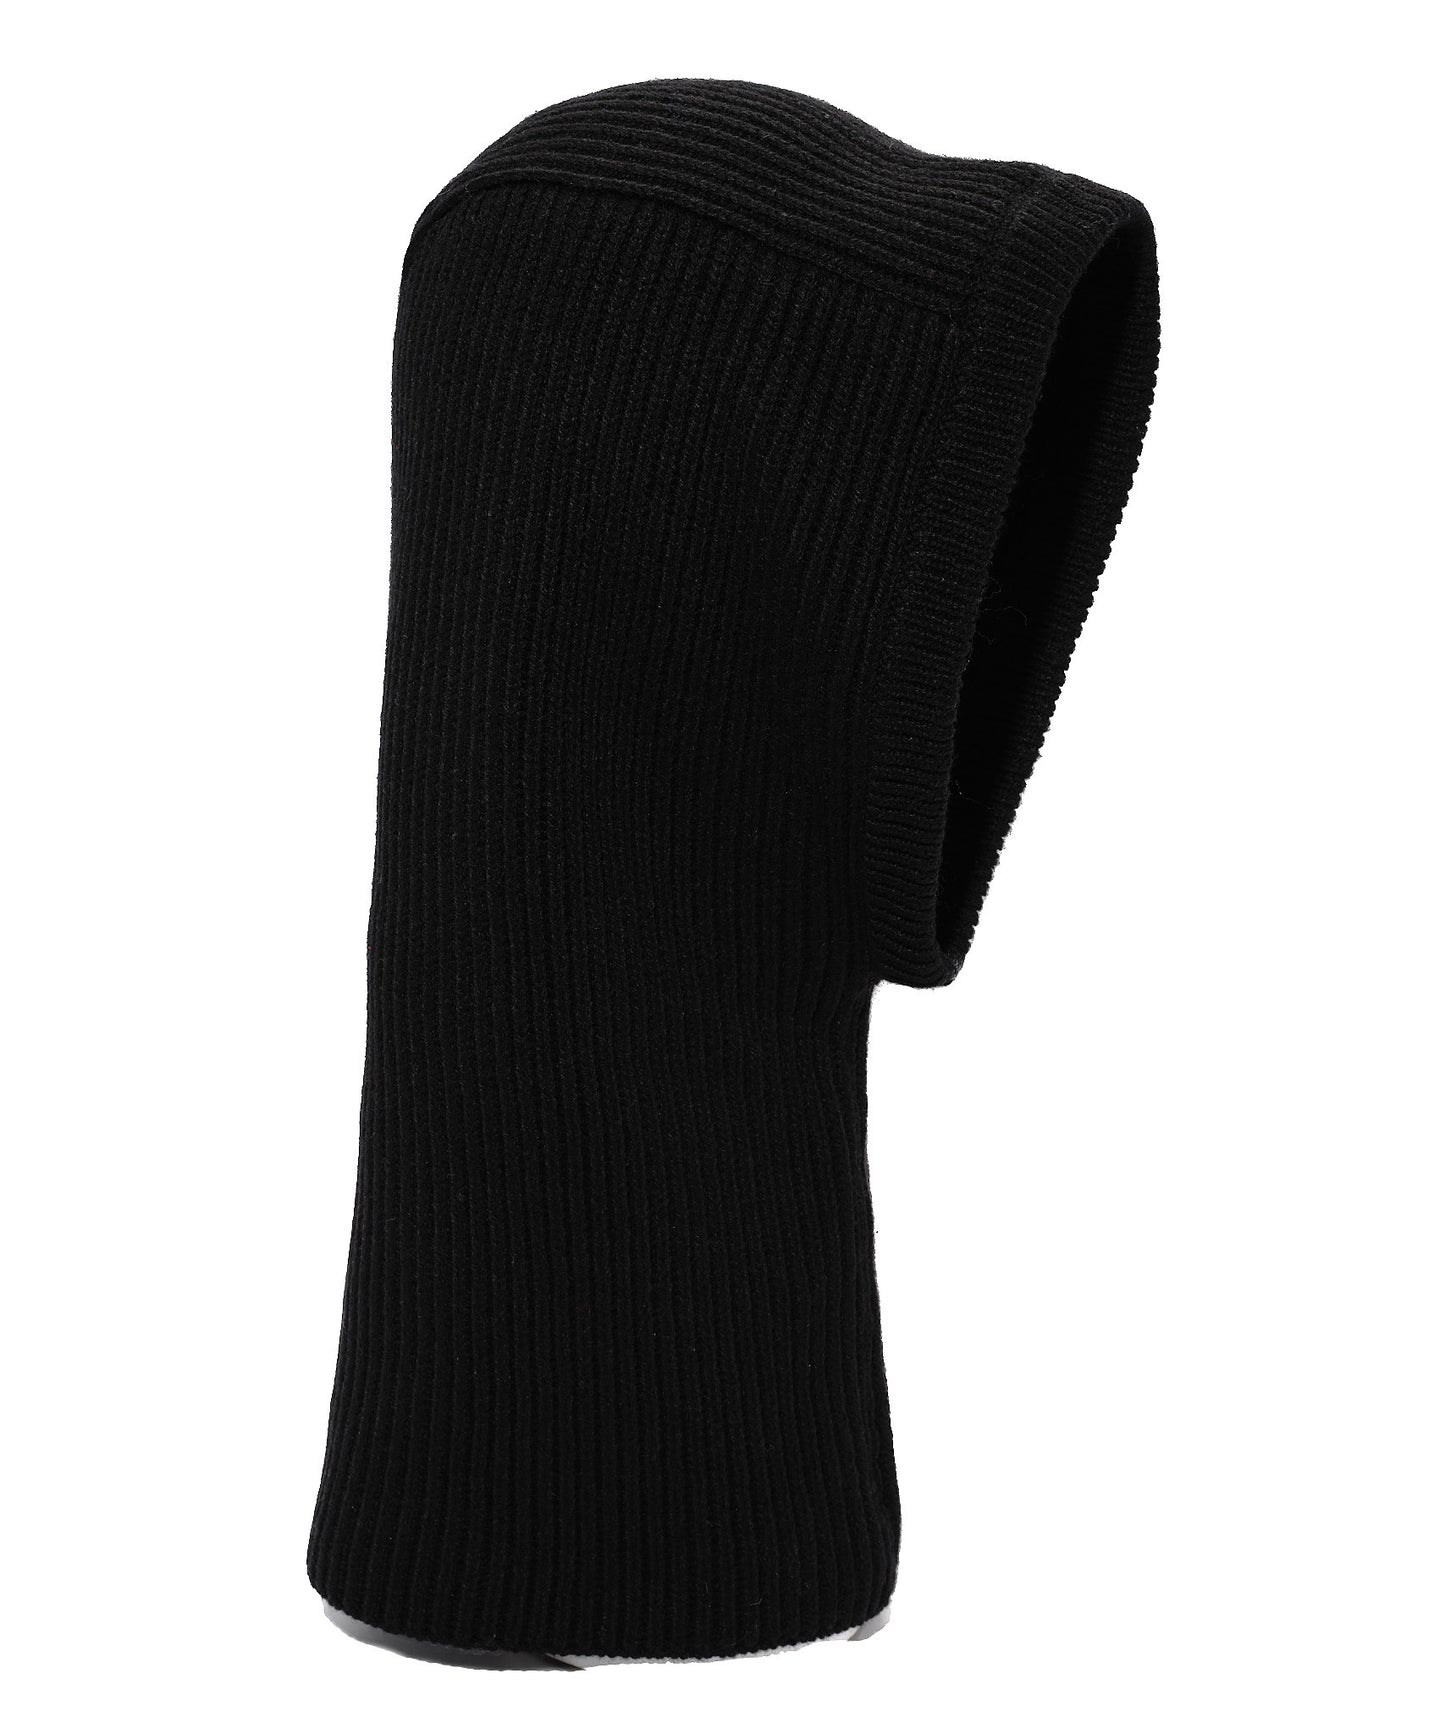 Perfect Ribbed Balaclava in color Black